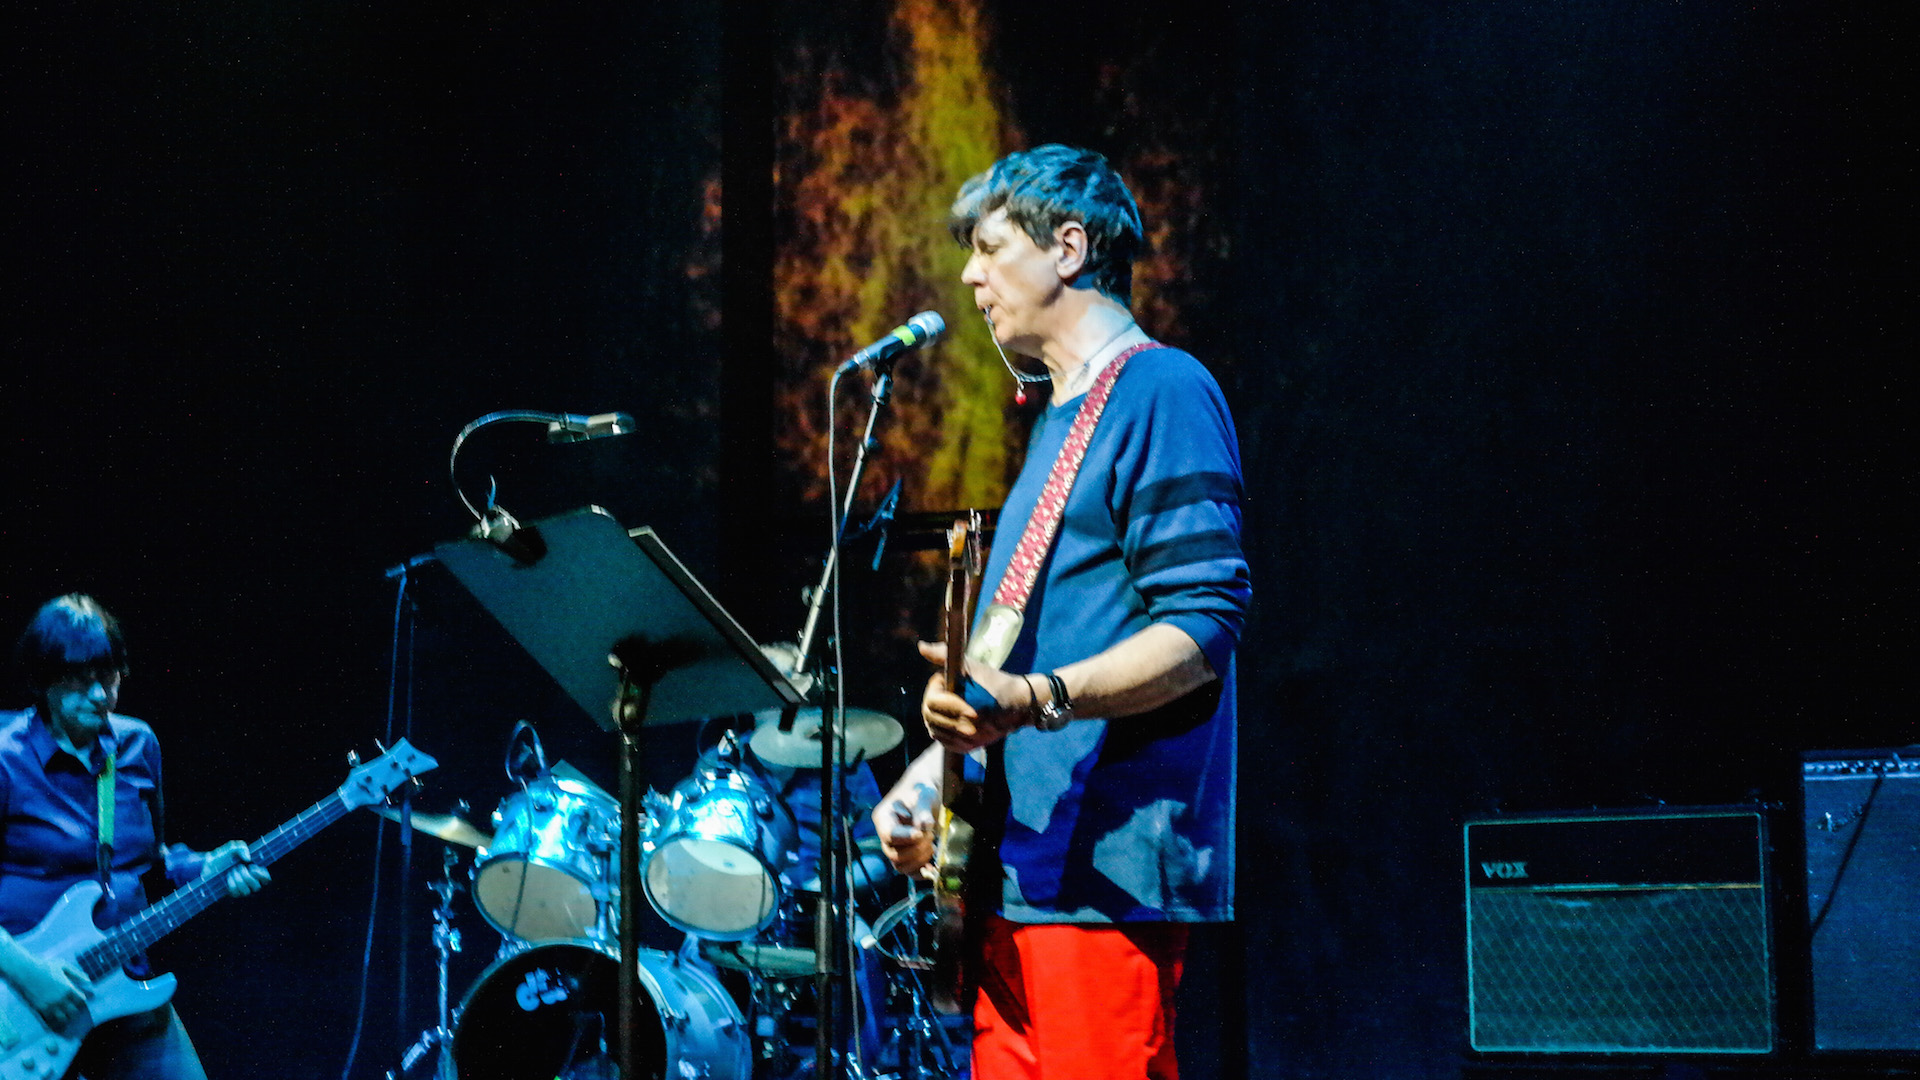 THE THURSTON MOORE BAND @ Fuzz Live Music Club, 25-4-2015